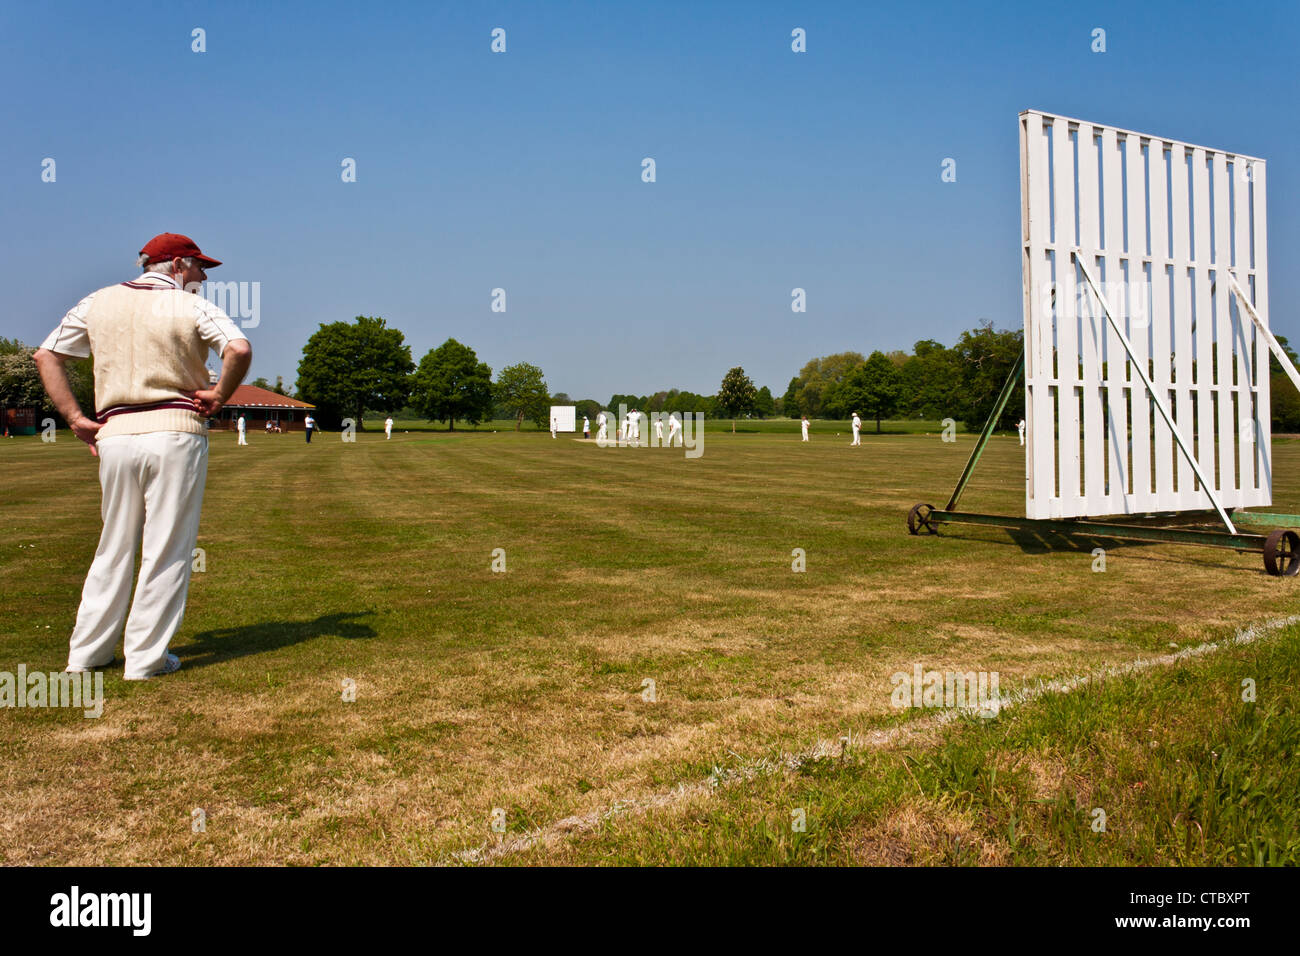 A traditional game of cricket on an English village green. Maidenhead, Berkshire England, GB, UK. Stock Photo